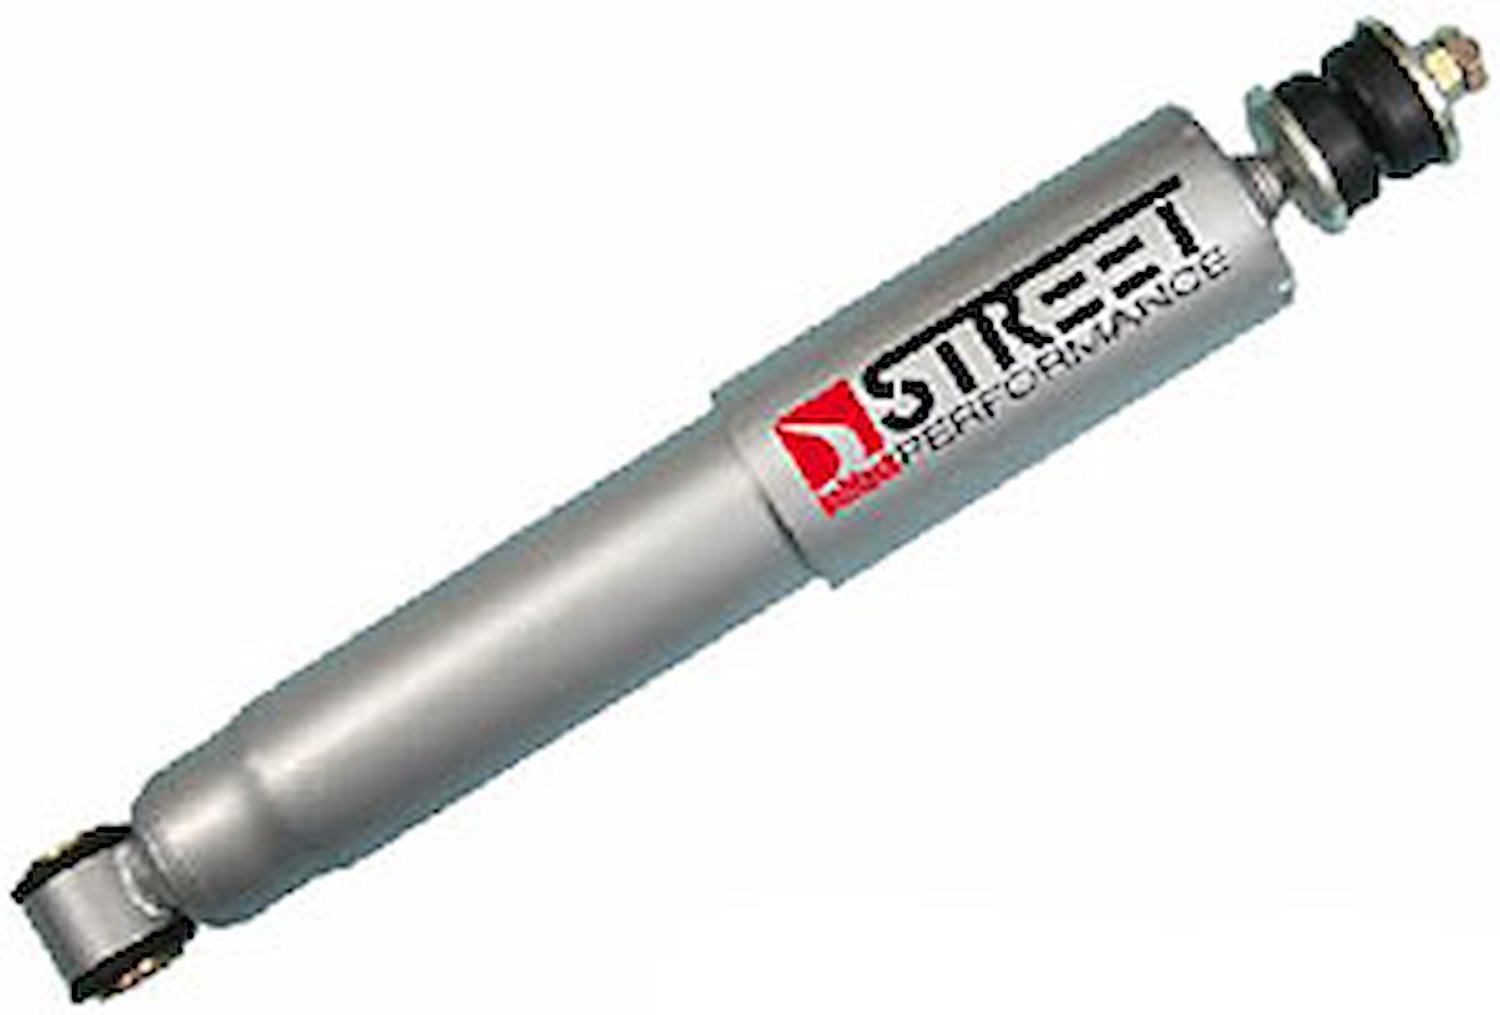 Street Performance Shock includes (1) 146-10602F Front Shock